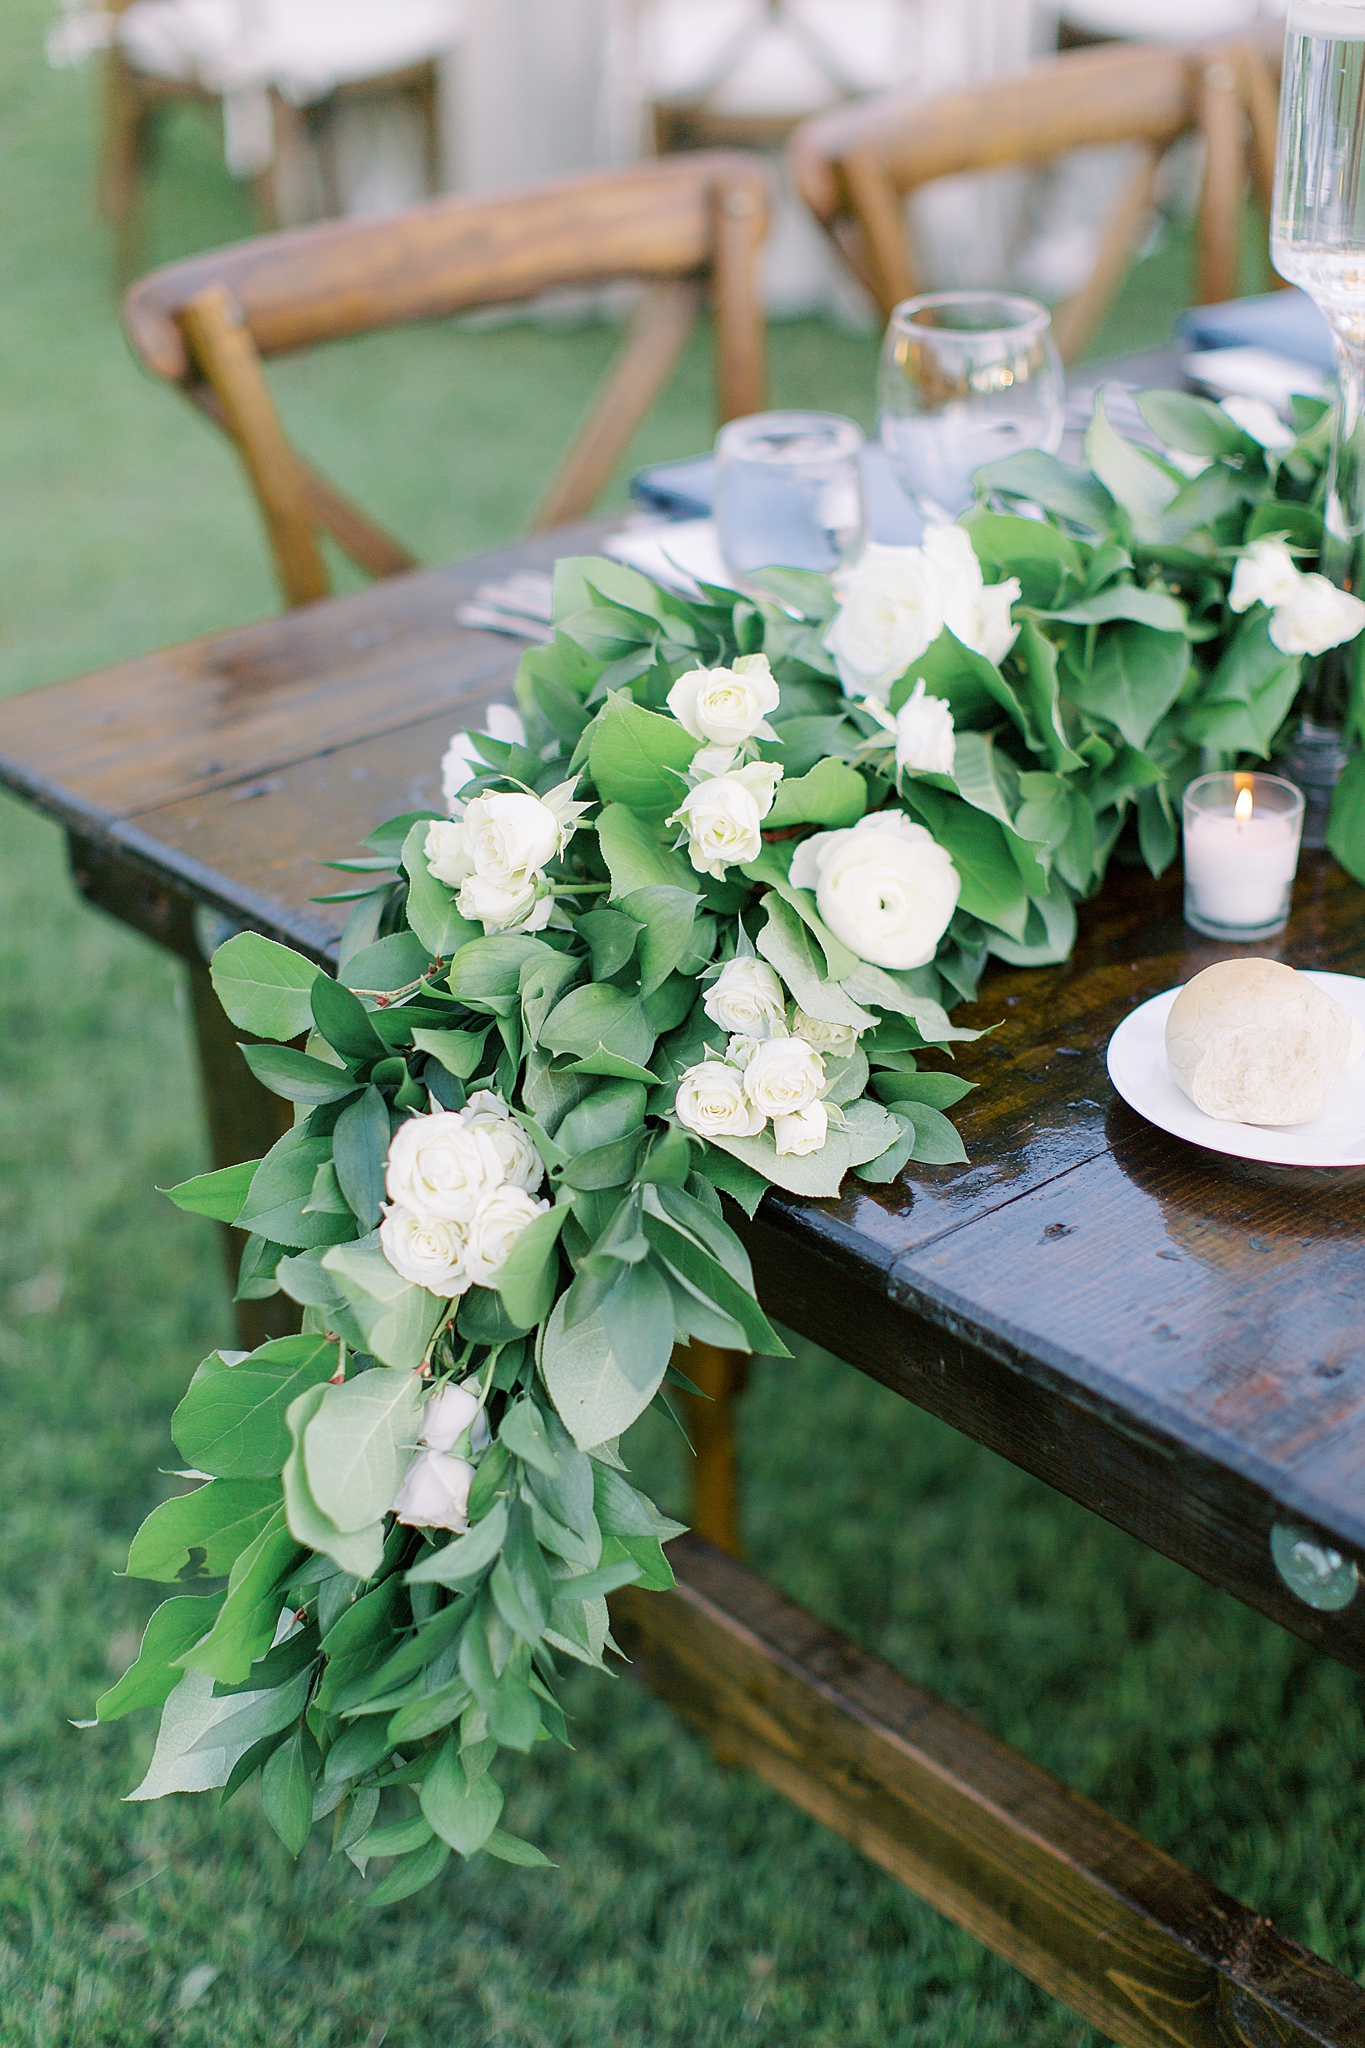 floral drape on dark wood table during rustic wedding reception